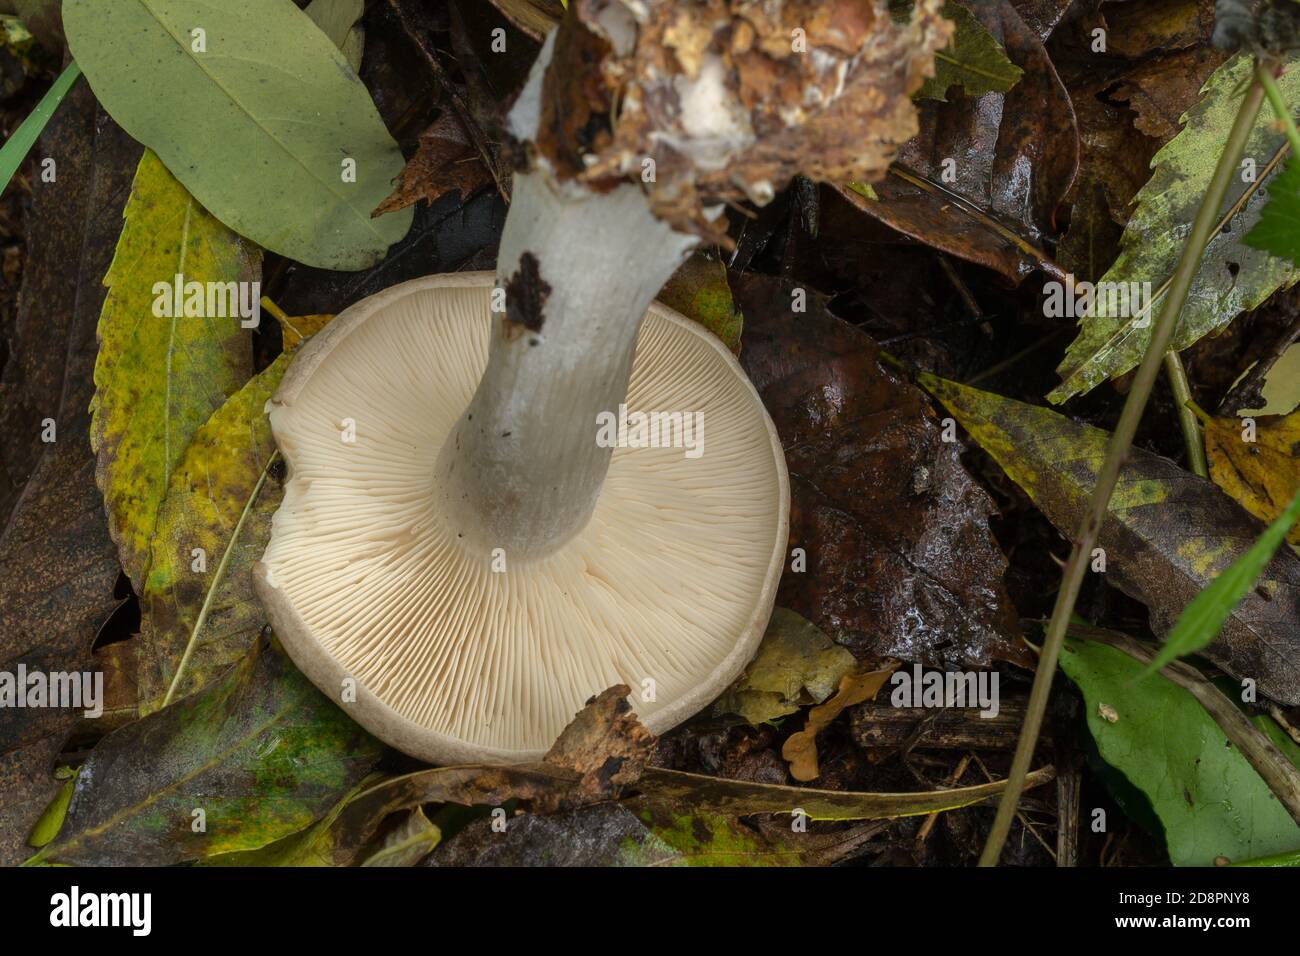 The gills of the young cloud funnel mushroom or the clitocybe nebularis. Stock Photo